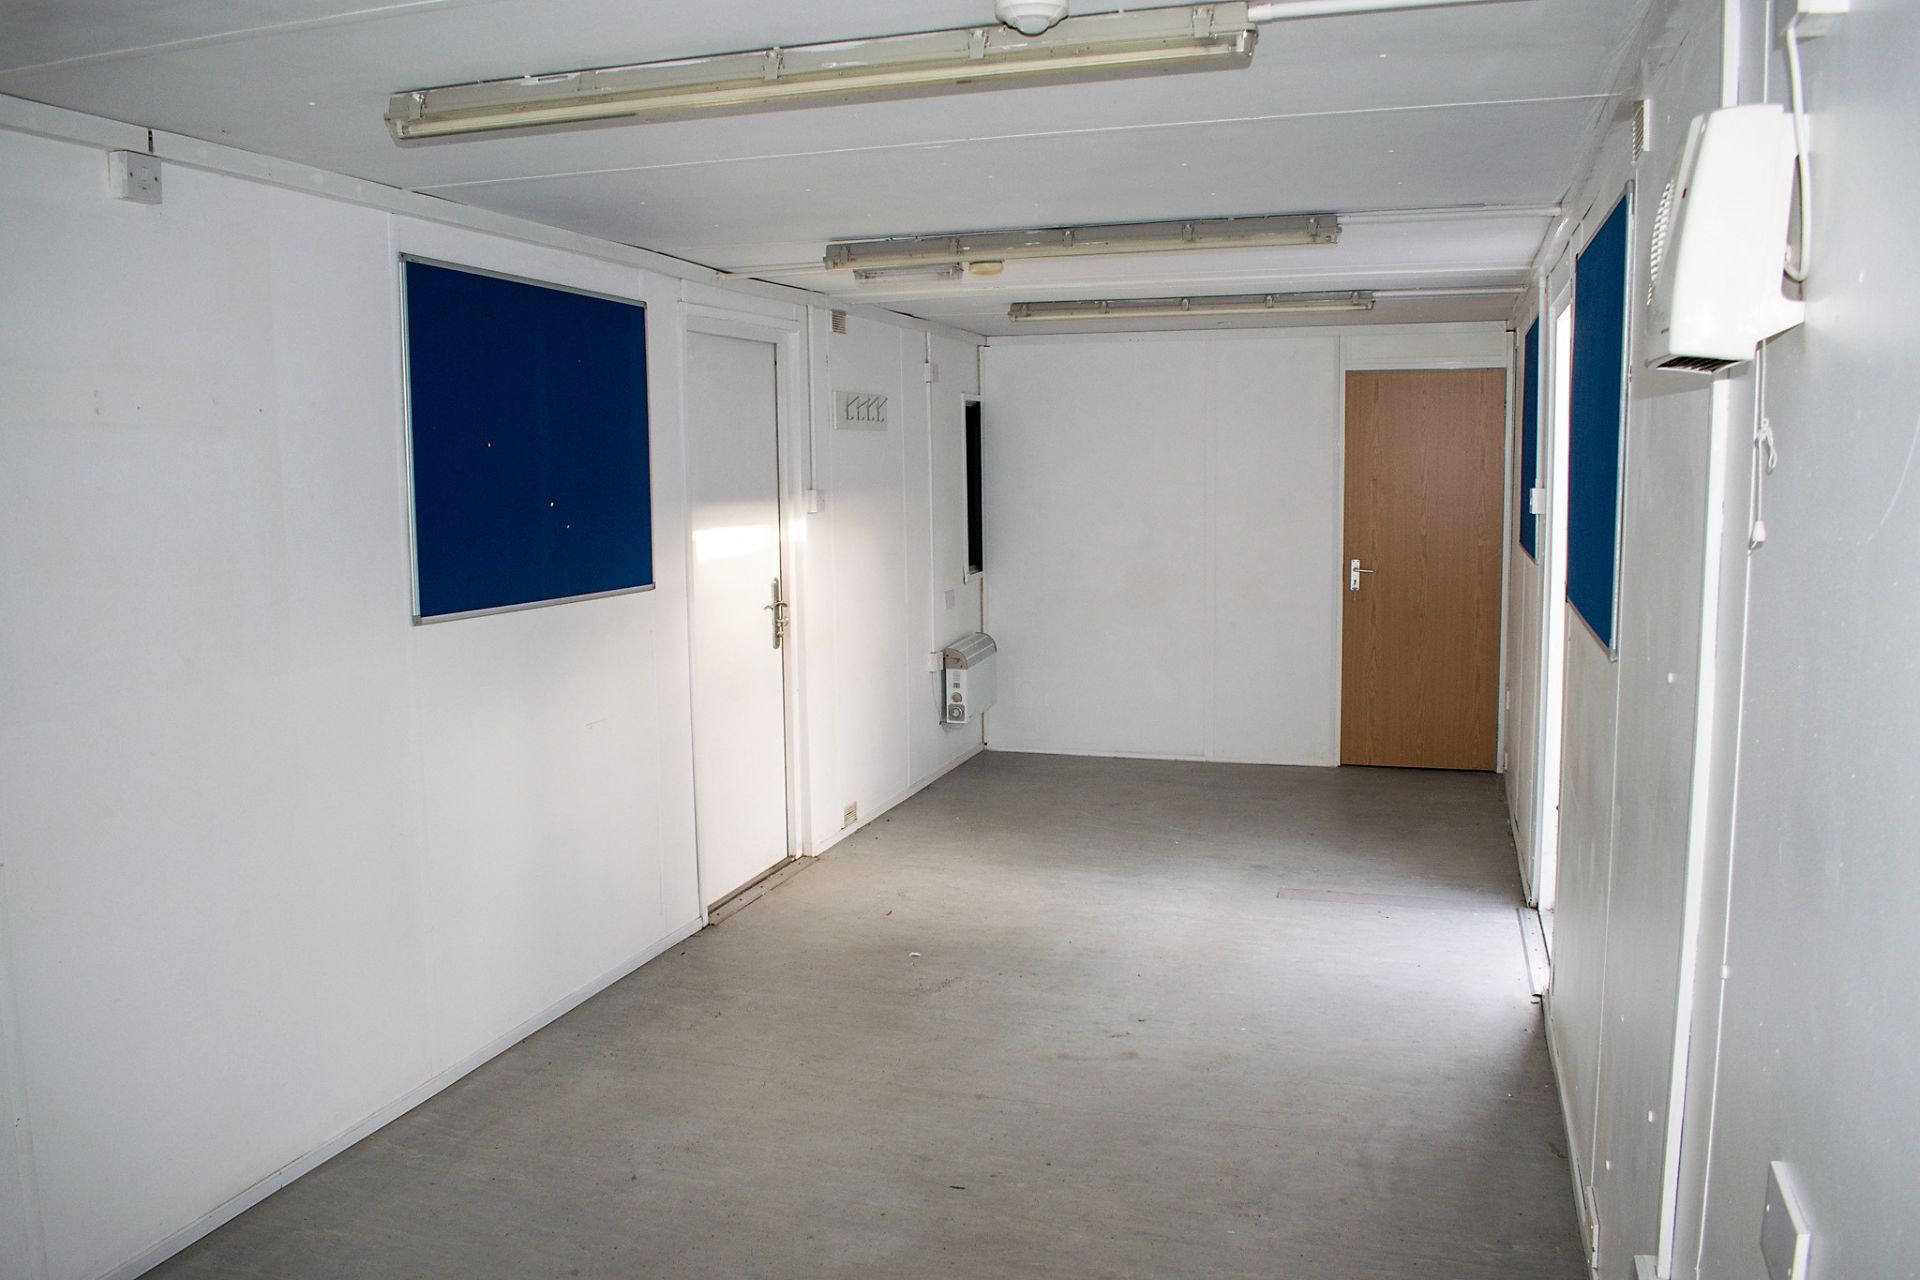 32 ft x 10 ft steel anti vandal office site unit Comprising of: office room & kitchen area c/w - Image 5 of 7